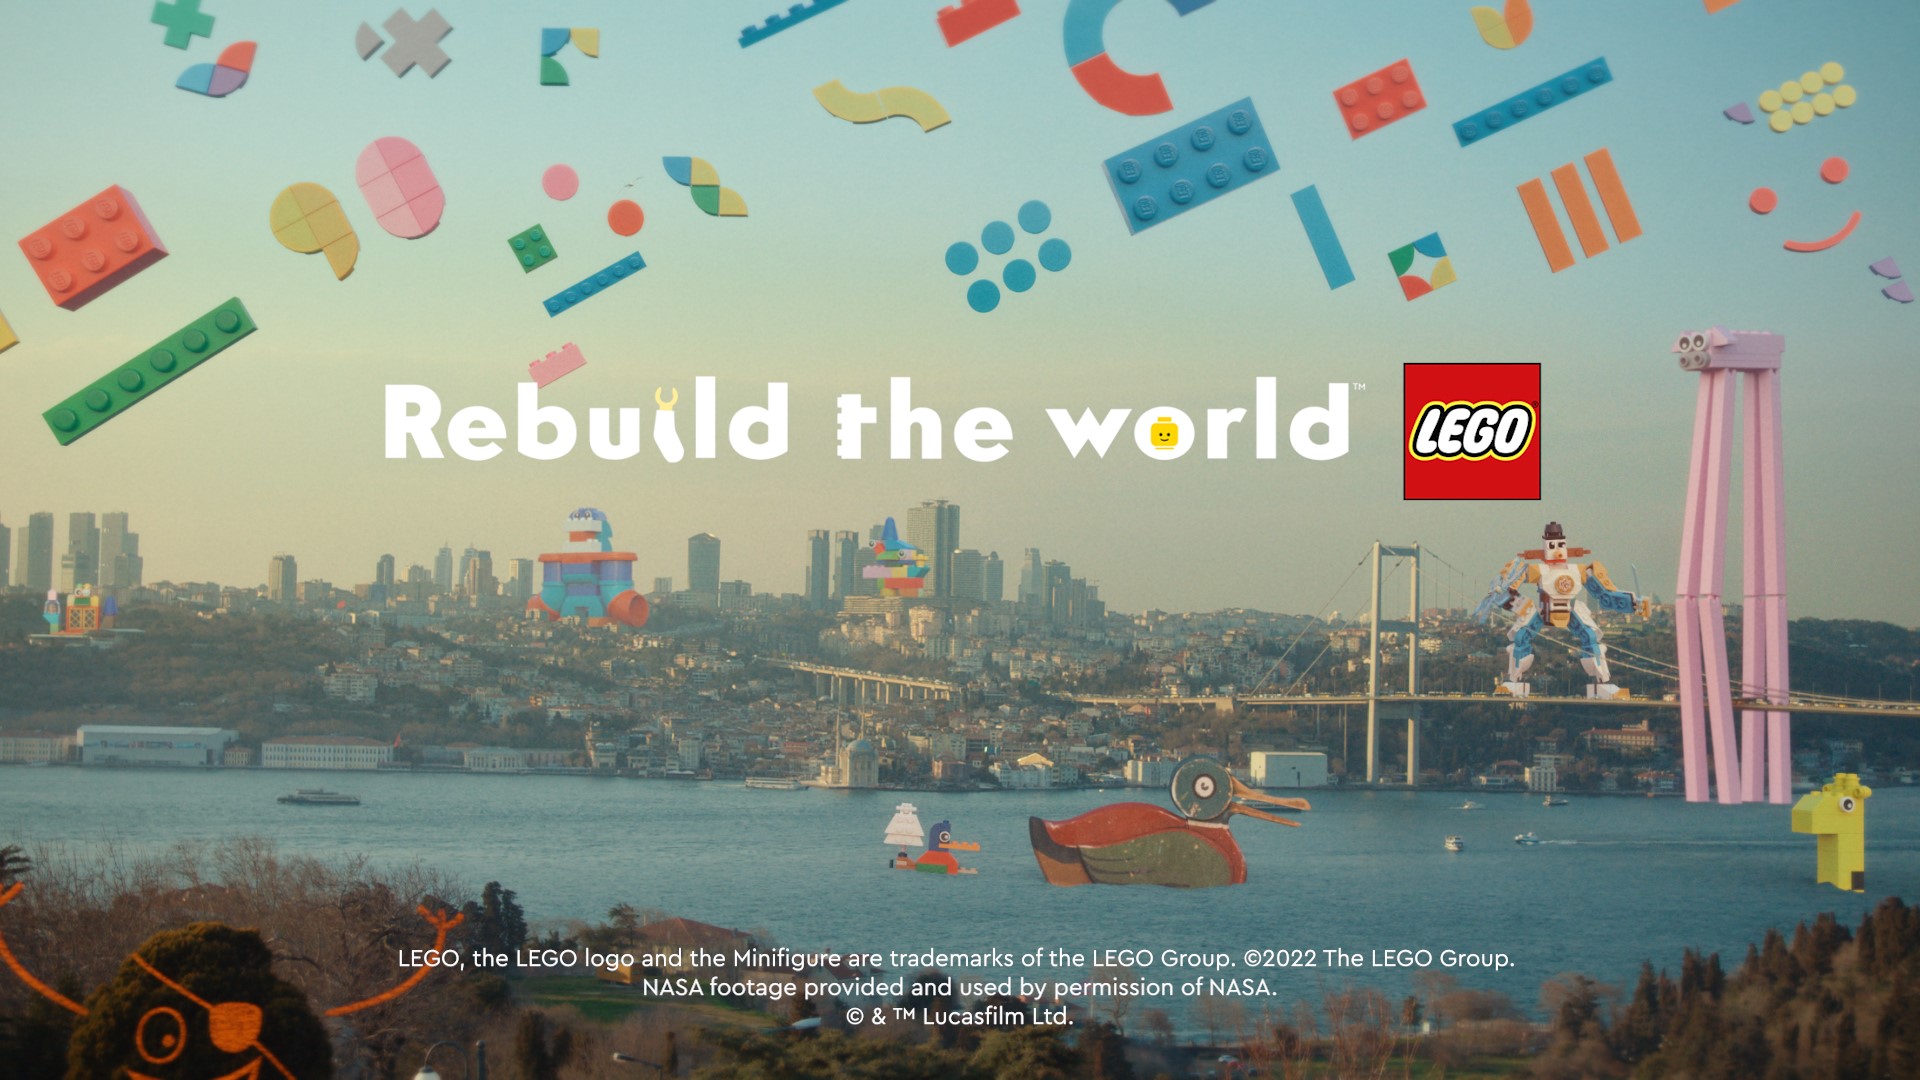 New LEGO® campaign celebrates 90 of World through play - About Us - LEGO.com